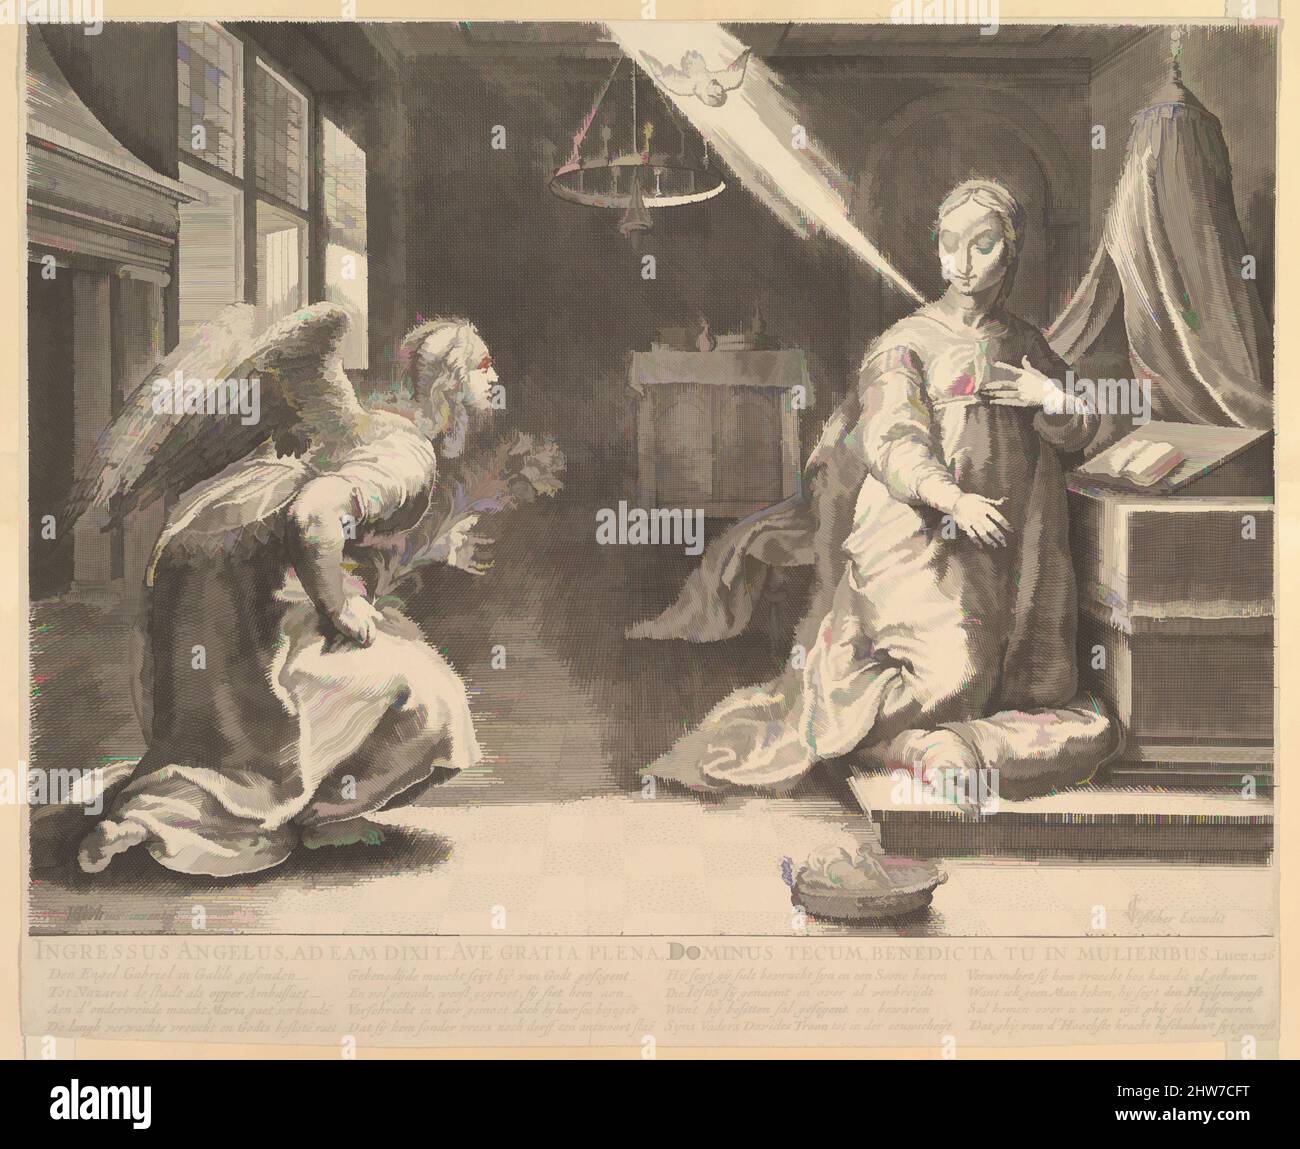 Art inspired by The Annunciation, before 1652, Engraving, Prints, After Hendrick Goltzius (Netherlandish, Mühlbracht 1558–1617 Haarlem, Classic works modernized by Artotop with a splash of modernity. Shapes, color and value, eye-catching visual impact on art. Emotions through freedom of artworks in a contemporary way. A timeless message pursuing a wildly creative new direction. Artists turning to the digital medium and creating the Artotop NFT Stock Photo